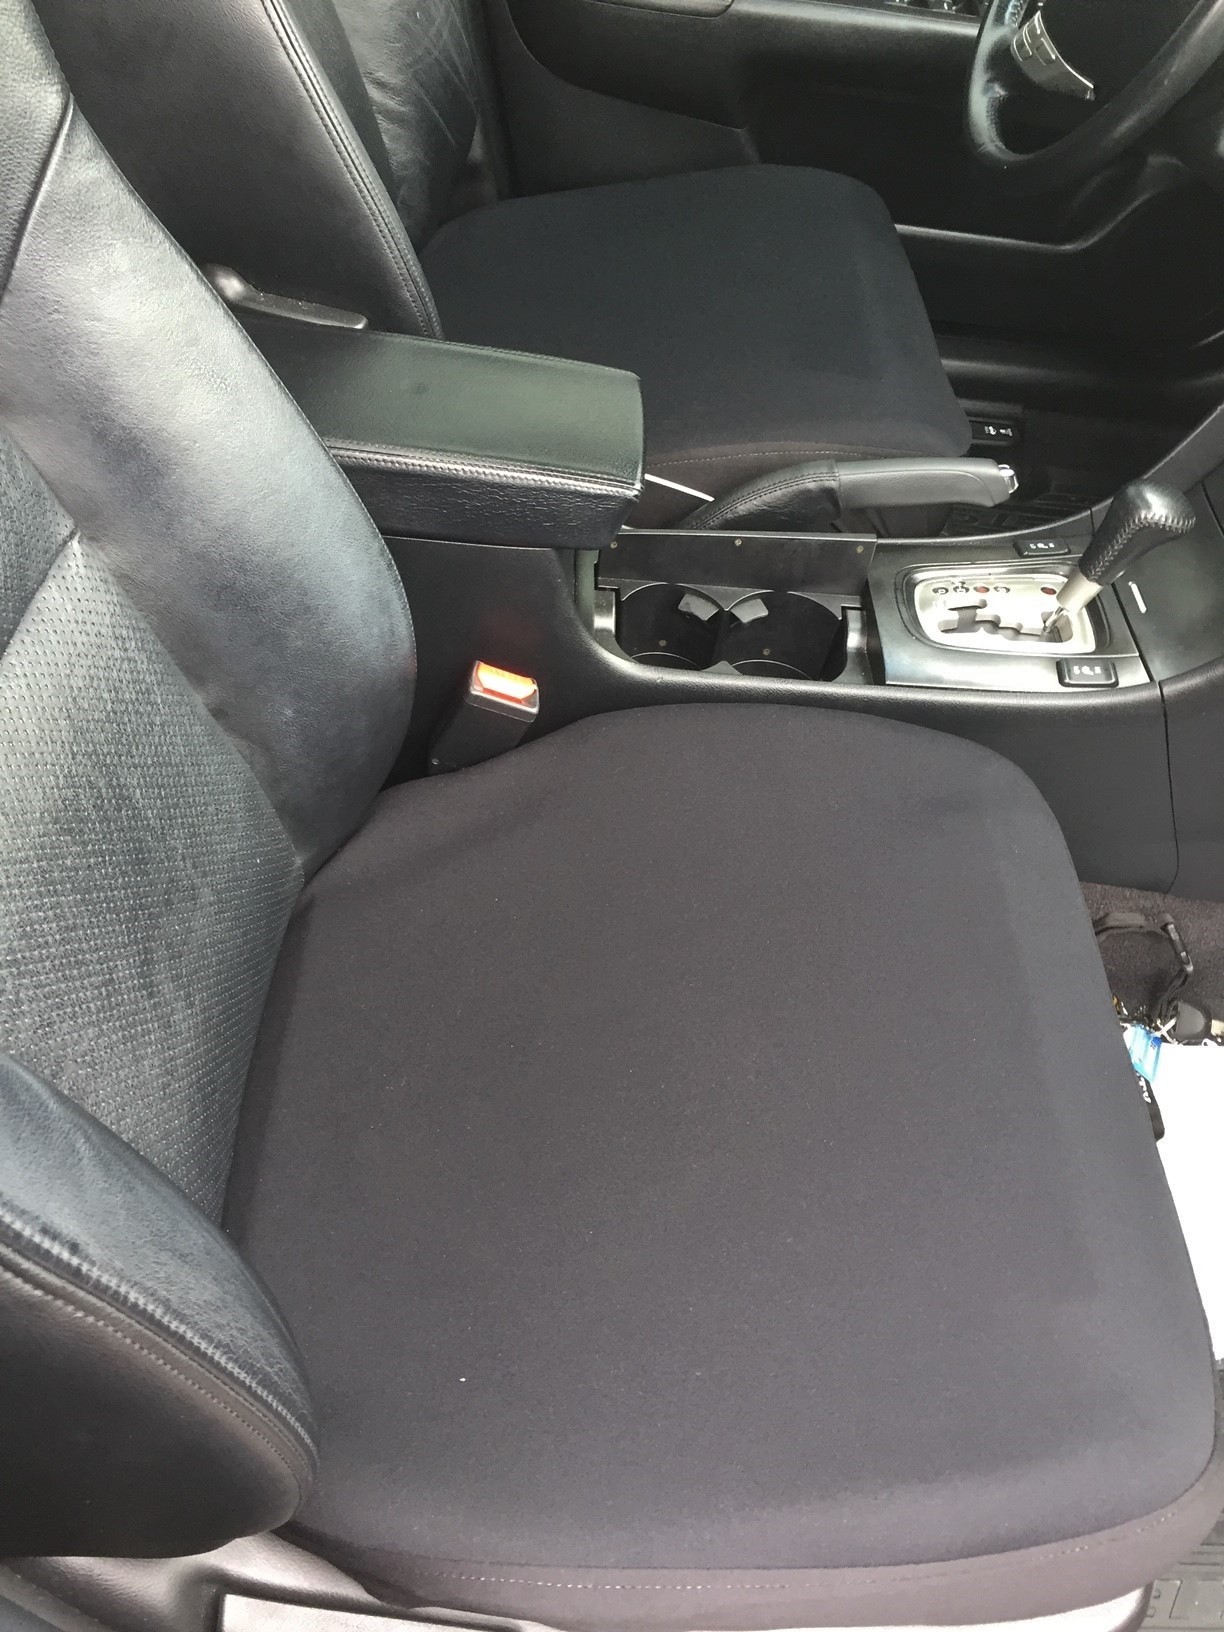 Bottom Only Covers for Ford Fusion 2010-19 Seat Covers For A 2010 Ford Fusion